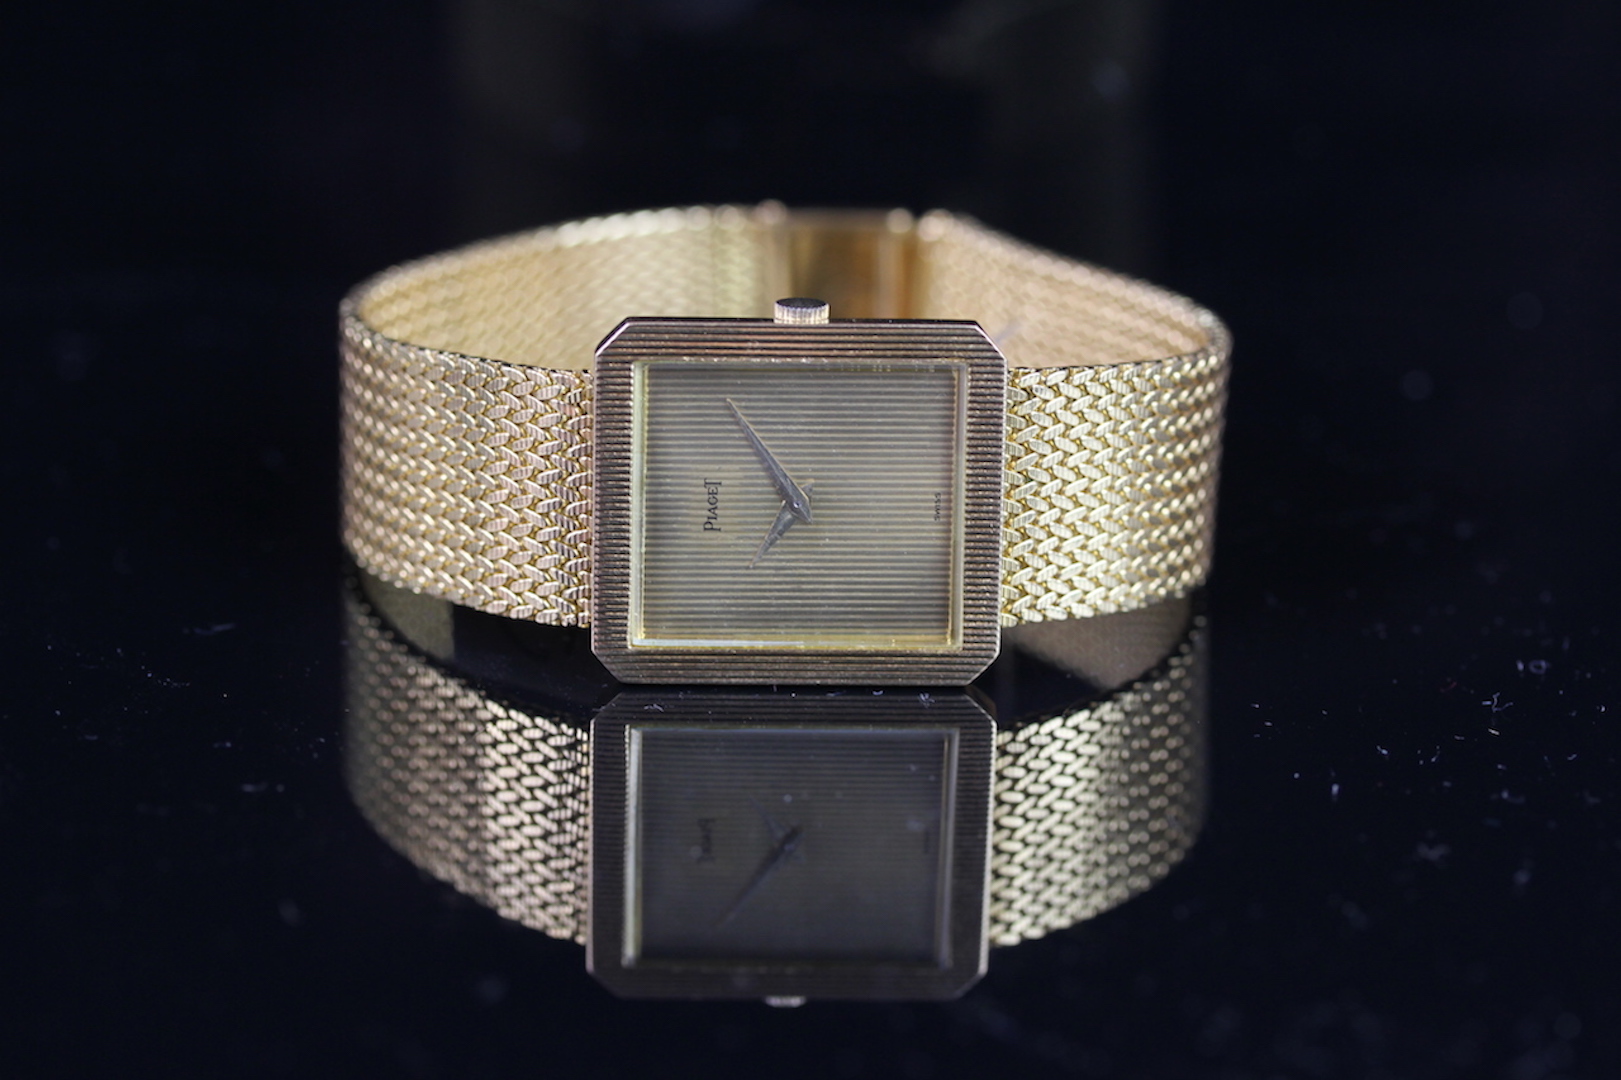 GENTLEMEN'S 18K GOLD PIAGET PROTOCOL, REF. 9154, WITH BRACELET, VINTAGE MANUALLY WOUND WRISTWATCH, - Image 4 of 5